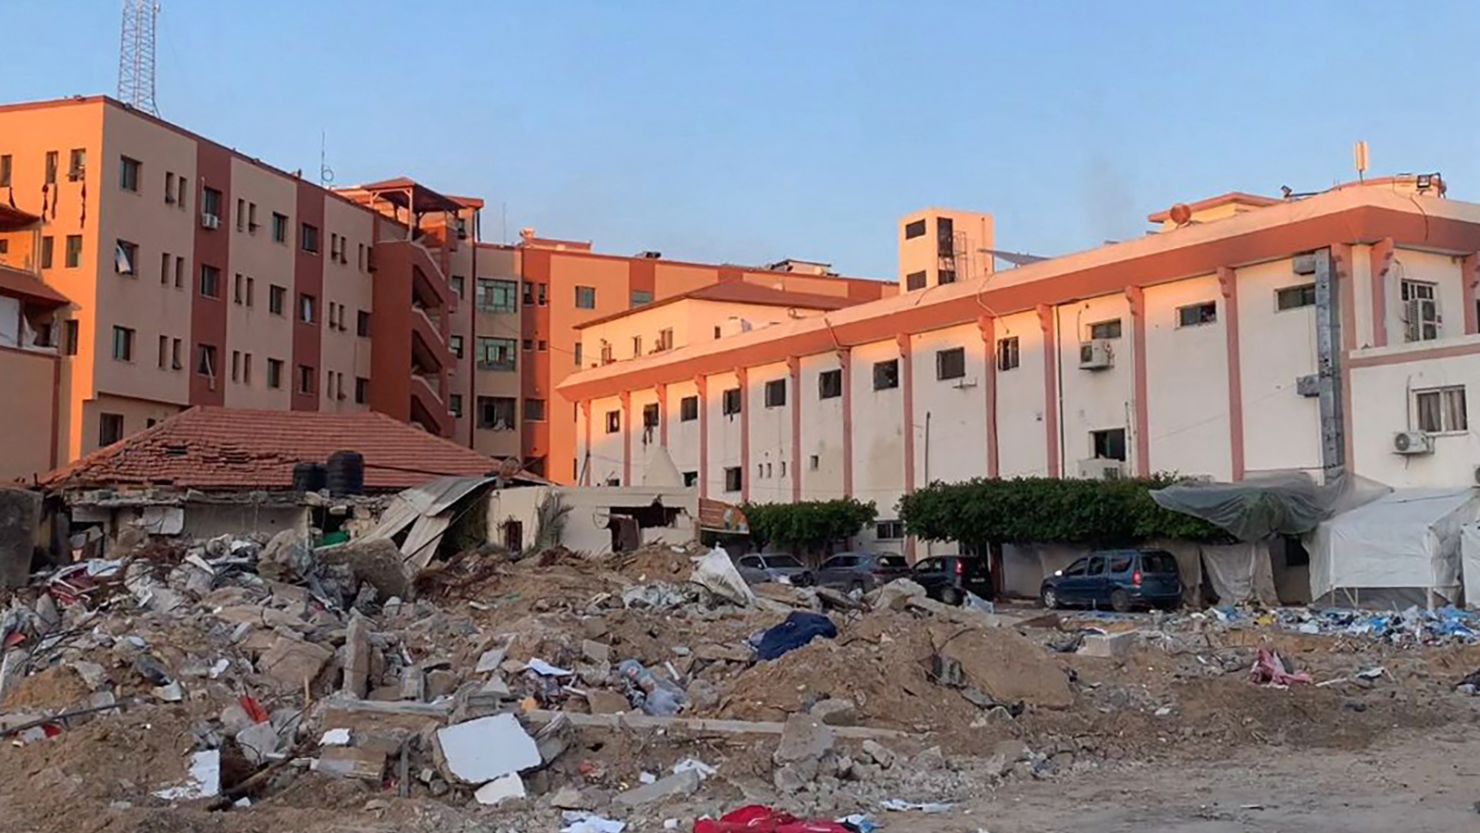 Damage in Nasser Hospital and the surrounding area in Khan Yunis in the southern Gaza Strip on February 26.